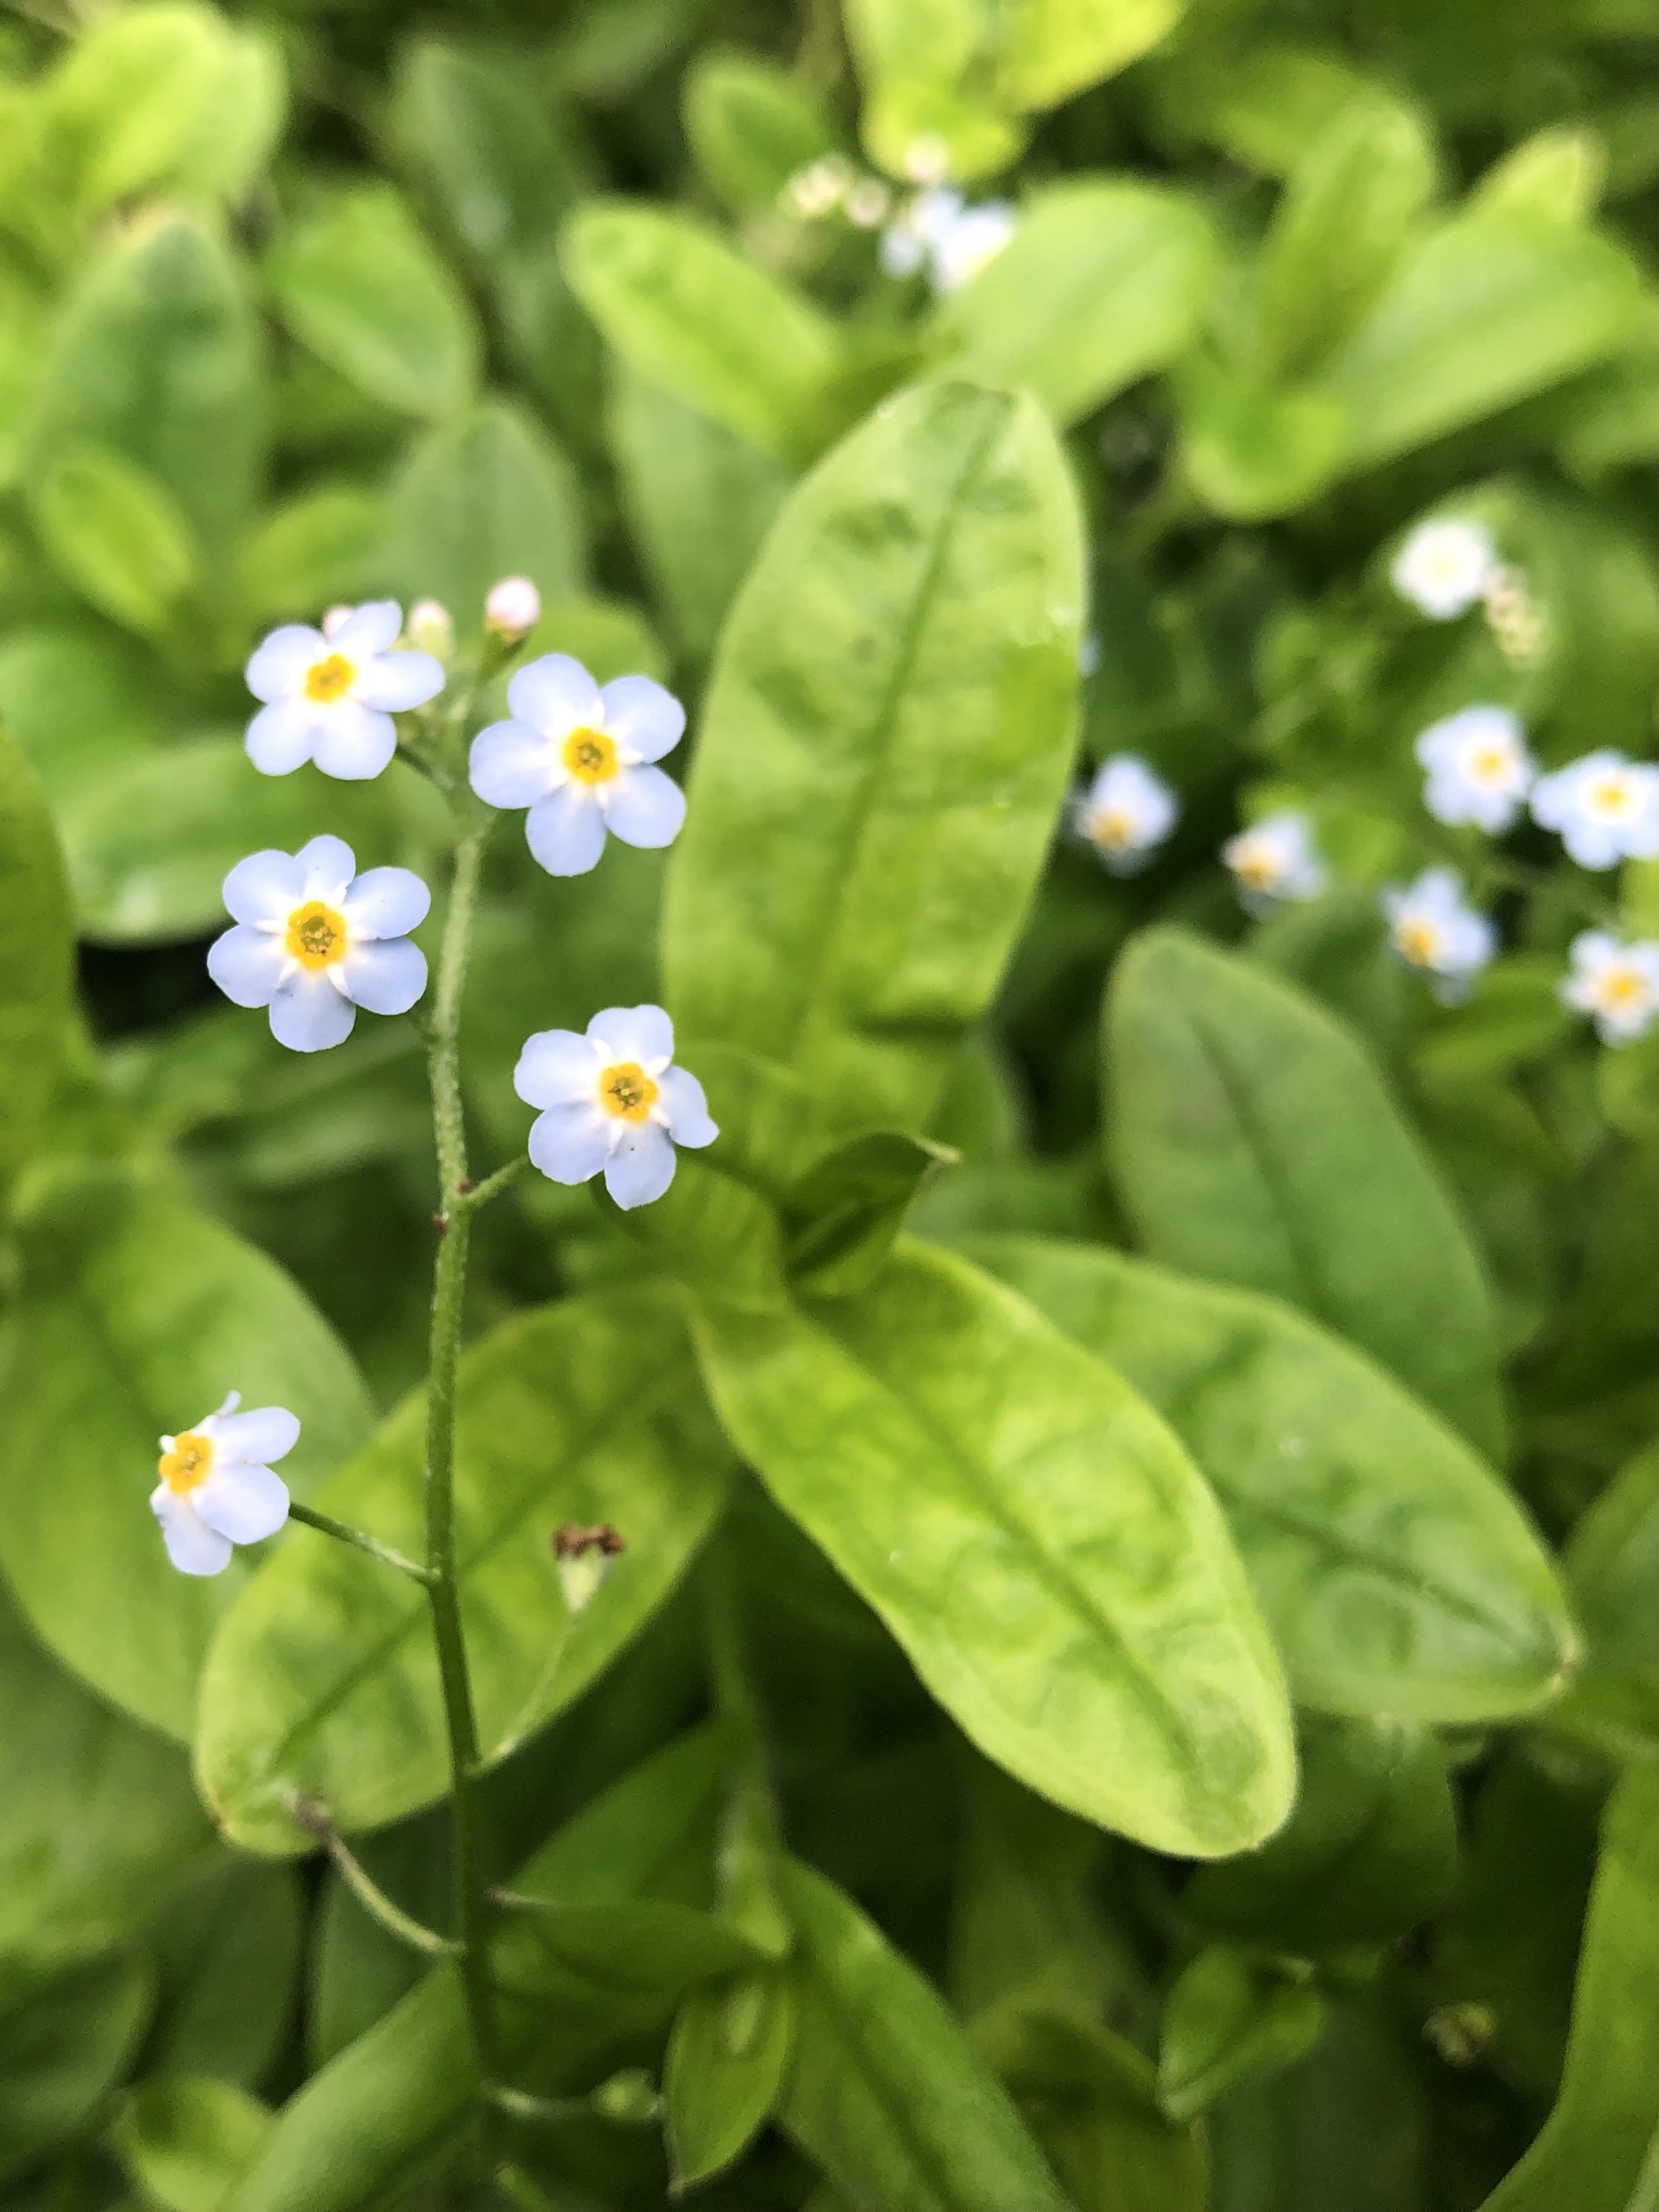 True Forget-me-not on bank of Council Ring Spring in Madison, Wisconsin on August 3, 2021.